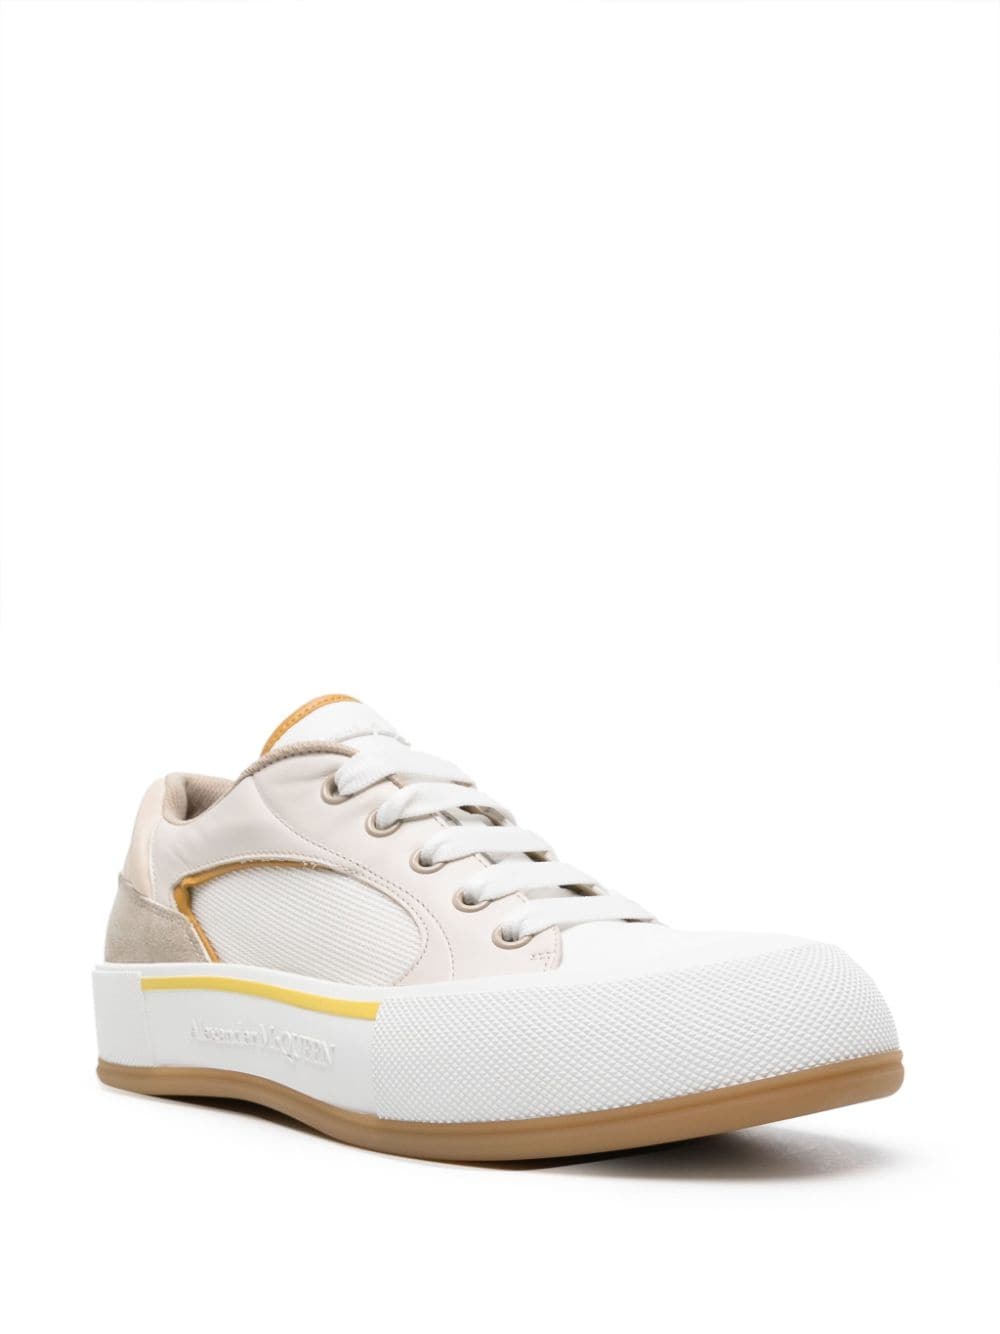 Image 2 of Alexander McQueen Seal-embroidered leather sneakers